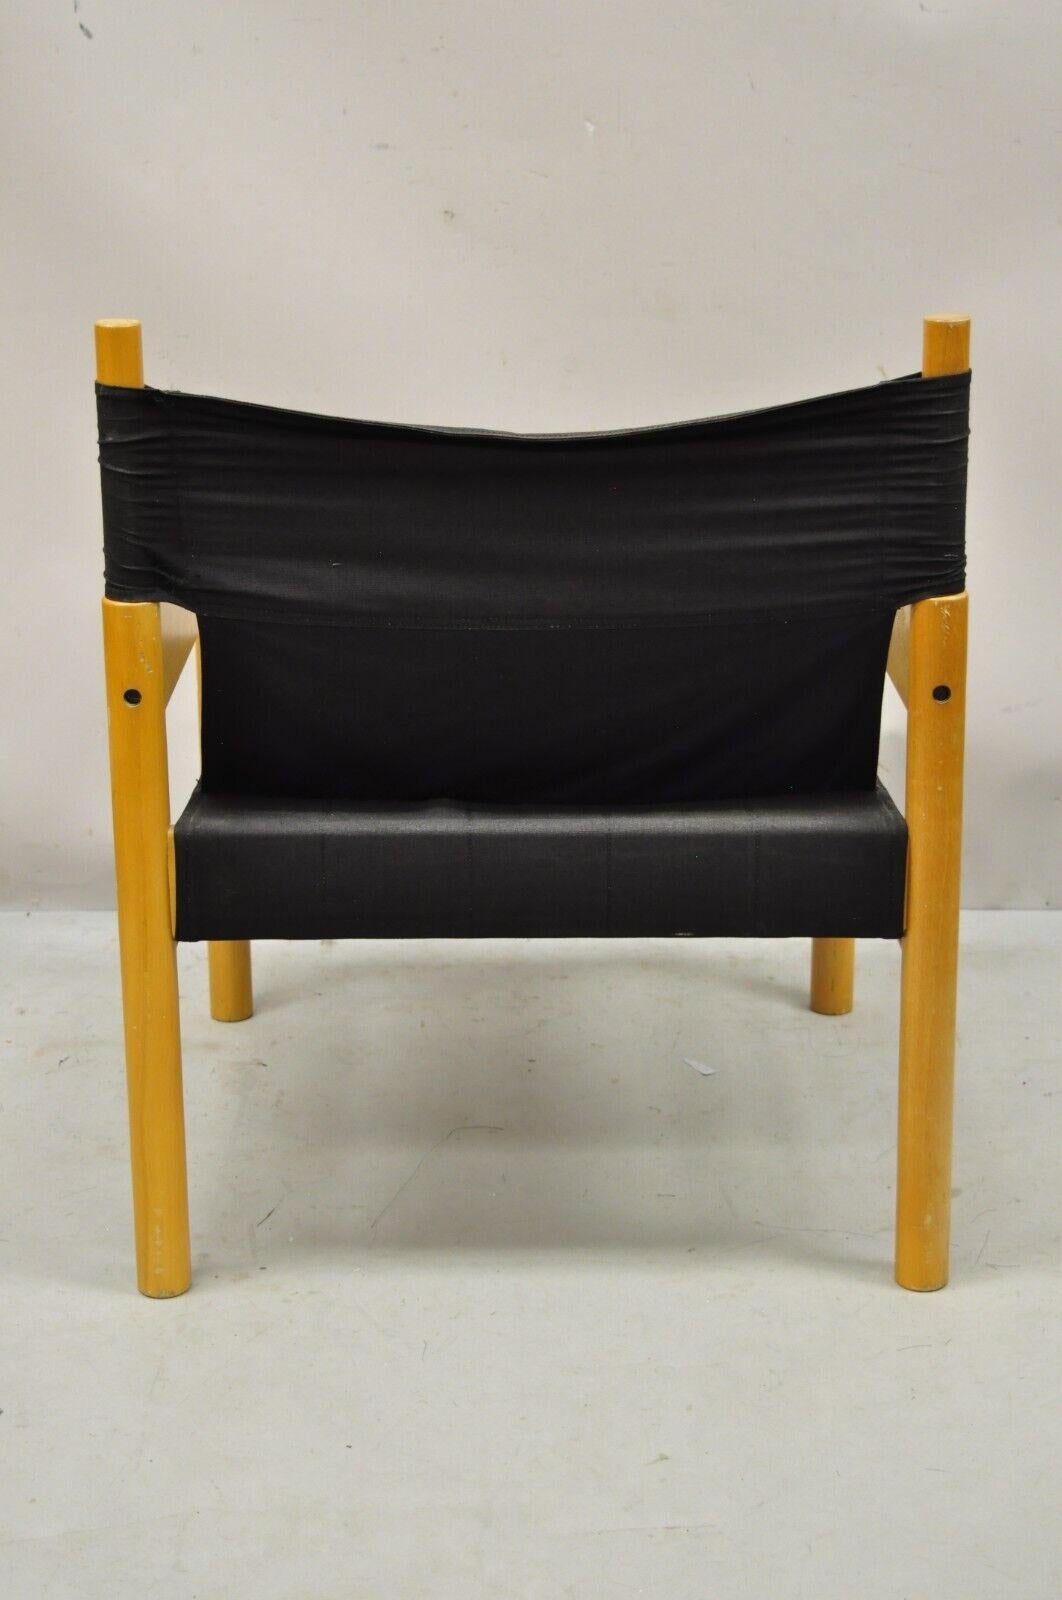 Vintage Scandinavian Modern Birch Wood Lounge Chair with Black Canvas Seat For Sale 5